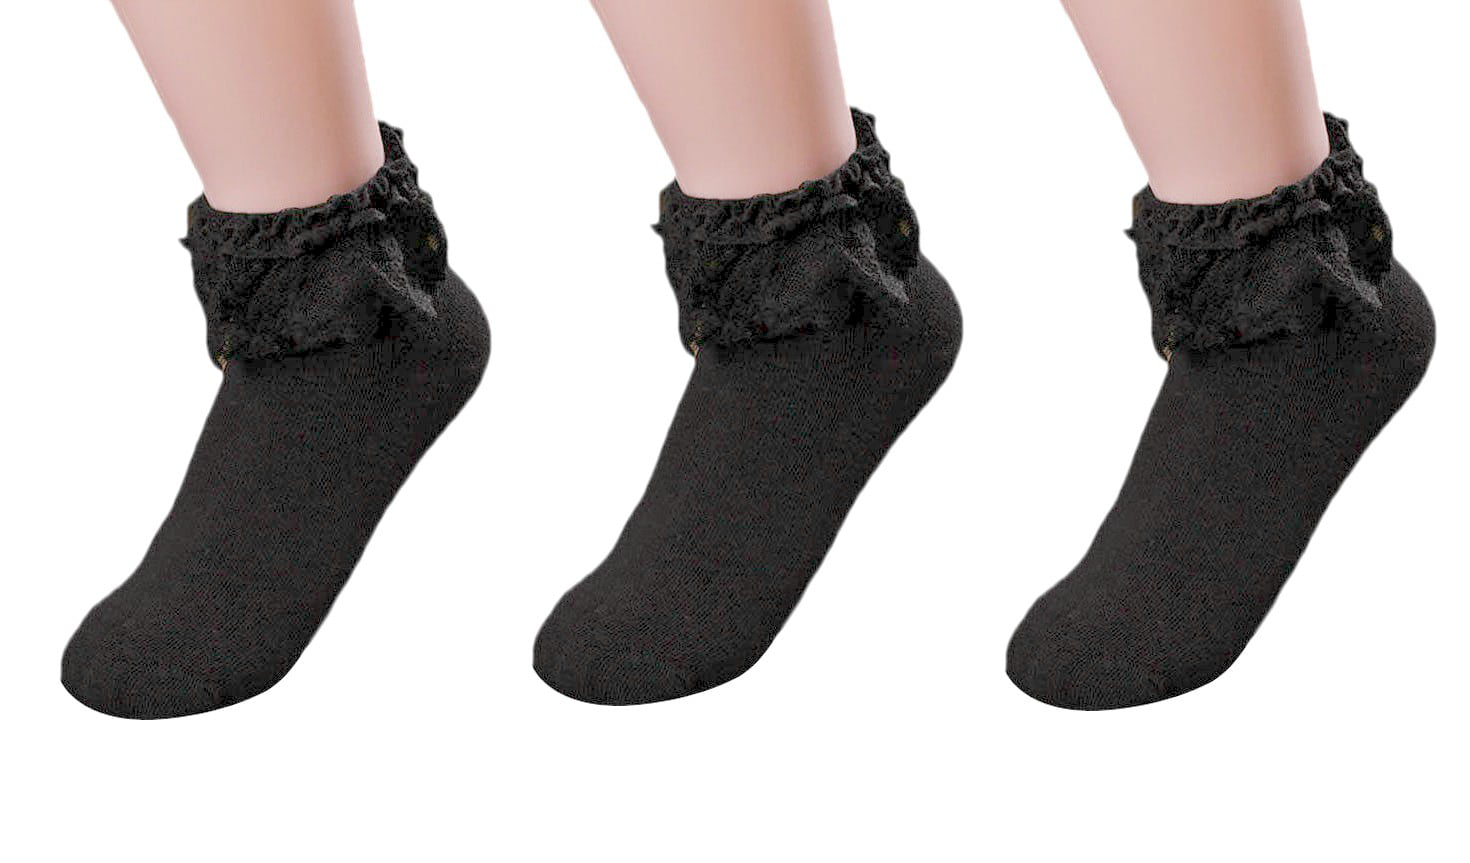 Details about   Women's Cute Princess Lace Ruffle Frilly Ankle Socks Casual Novelty White Black